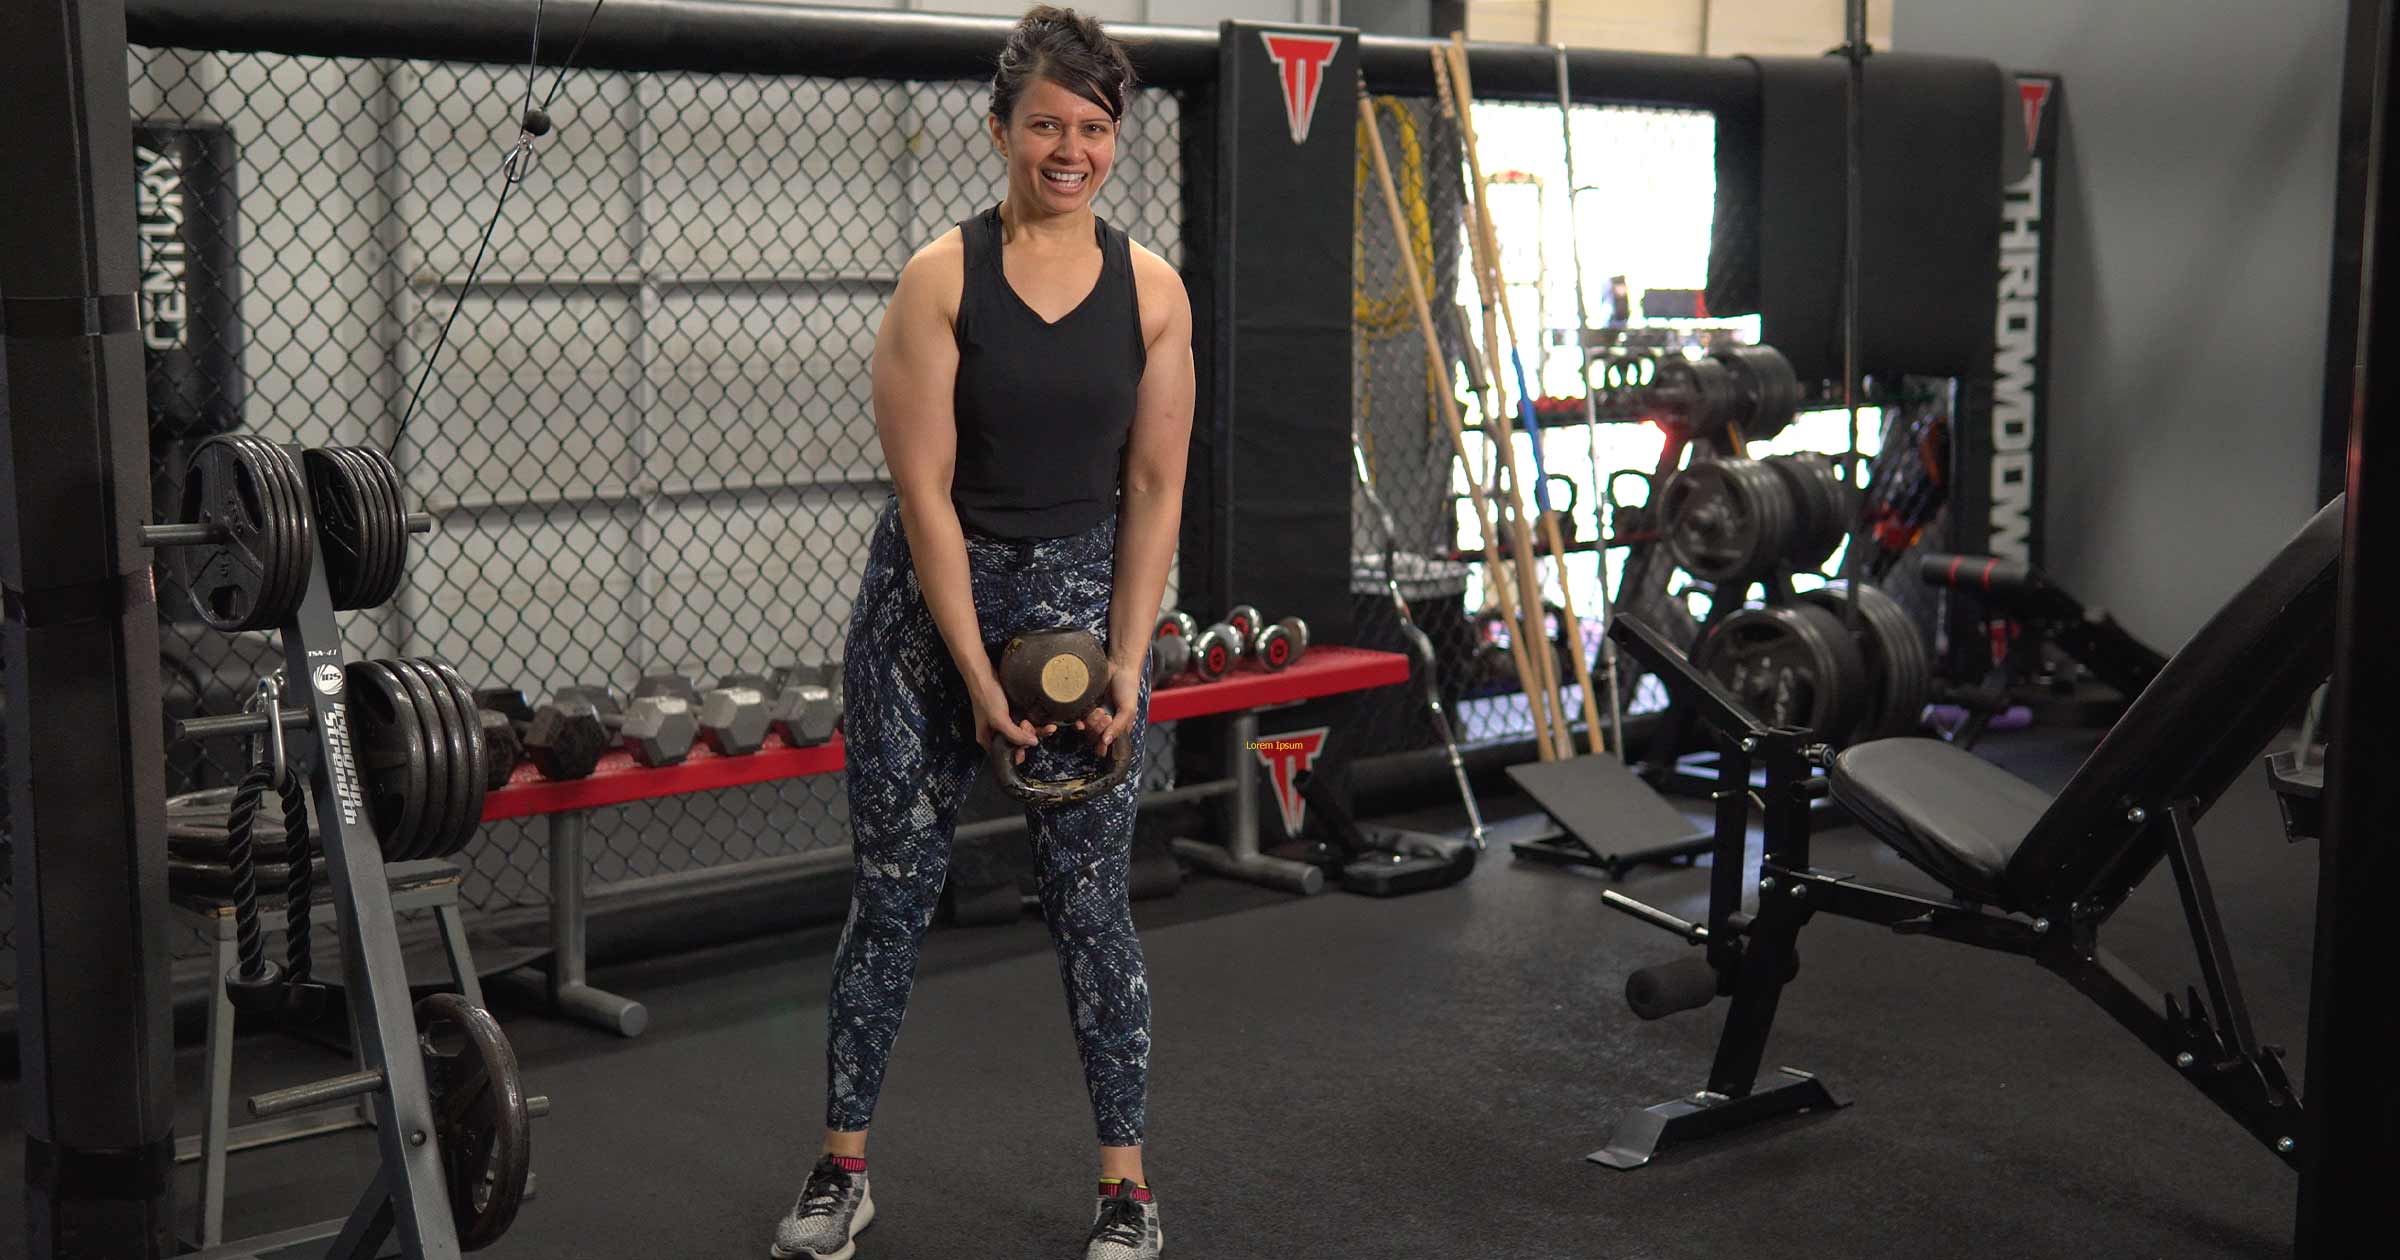 Woman working out at the gym smiling